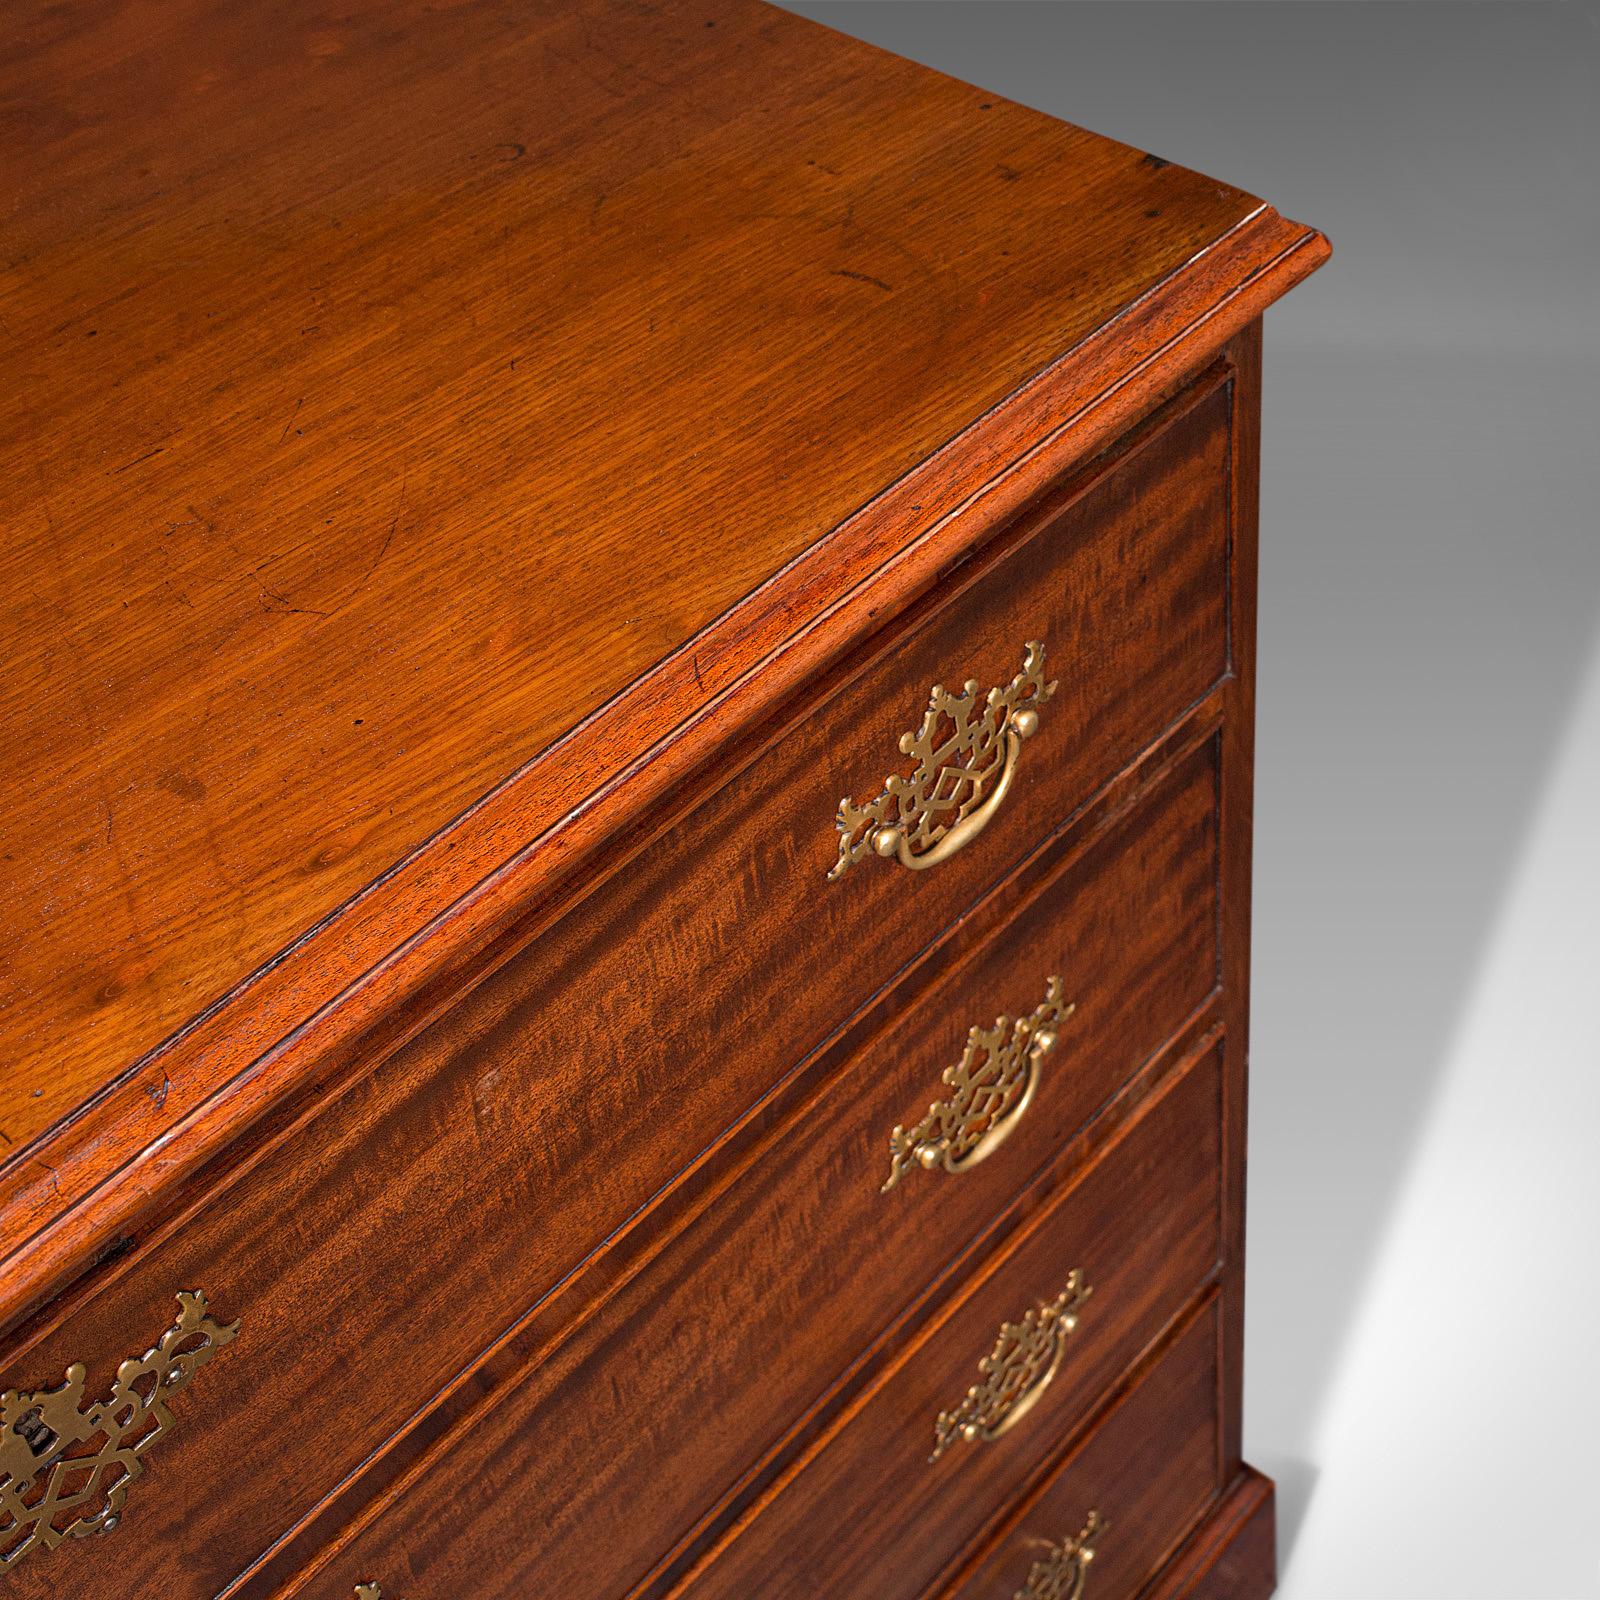 Antique Gentleman's Chest of Drawers, English, Mahogany, Bedroom, Georgian, 1800 For Sale 1